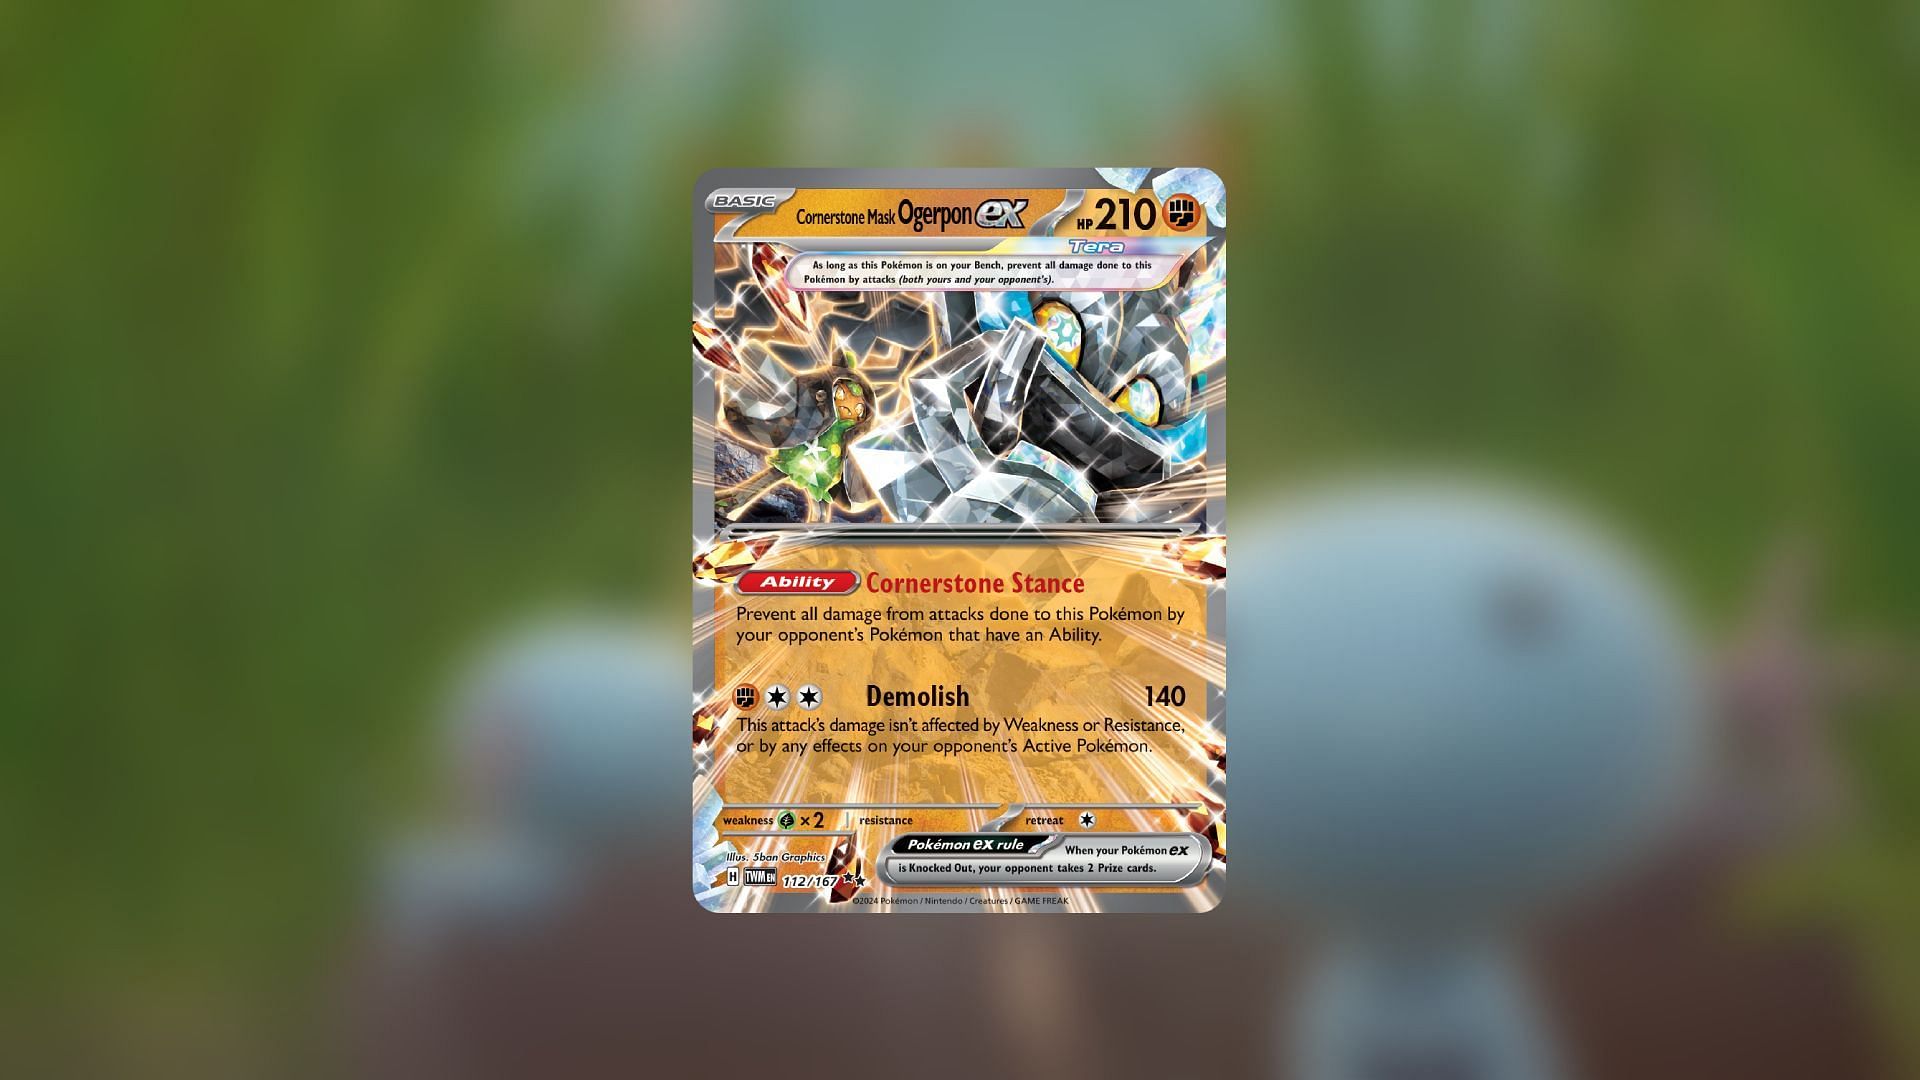 Cornerstone Ogerpon is both a holographic ex card and a powerful asset in battles thanks to its ability in the Pokemon TCG (Image via The Pokemon Company)